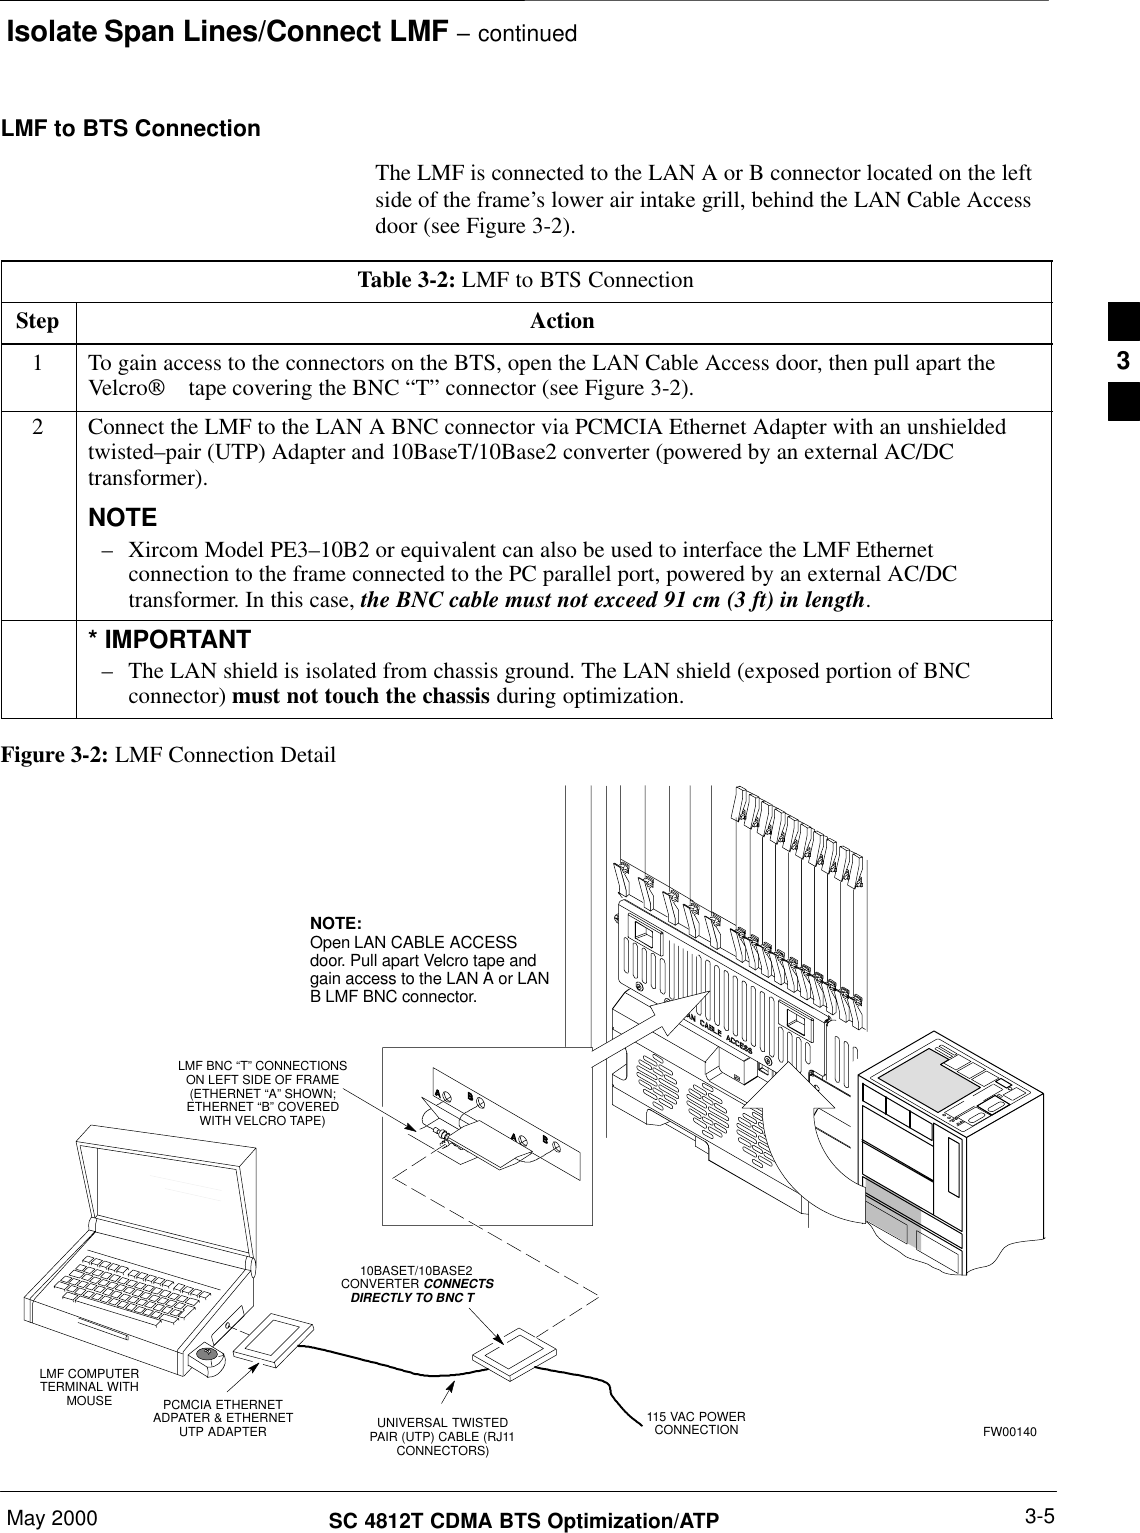 Isolate Span Lines/Connect LMF – continuedMay 2000 3-5SC 4812T CDMA BTS Optimization/ATPLMF to BTS ConnectionThe LMF is connected to the LAN A or B connector located on the leftside of the frame’s lower air intake grill, behind the LAN Cable Accessdoor (see Figure 3-2).Table 3-2: LMF to BTS ConnectionStep Action1To gain access to the connectors on the BTS, open the LAN Cable Access door, then pull apart theVelcro tape covering the BNC “T” connector (see Figure 3-2).2Connect the LMF to the LAN A BNC connector via PCMCIA Ethernet Adapter with an unshieldedtwisted–pair (UTP) Adapter and 10BaseT/10Base2 converter (powered by an external AC/DCtransformer).NOTE– Xircom Model PE3–10B2 or equivalent can also be used to interface the LMF Ethernetconnection to the frame connected to the PC parallel port, powered by an external AC/DCtransformer. In this case, the BNC cable must not exceed 91 cm (3 ft) in length.* IMPORTANT– The LAN shield is isolated from chassis ground. The LAN shield (exposed portion of BNCconnector) must not touch the chassis during optimization.Figure 3-2: LMF Connection DetailNOTE:Open LAN CABLE ACCESSdoor. Pull apart Velcro tape andgain access to the LAN A or LANB LMF BNC connector.LMF BNC “T” CONNECTIONSON LEFT SIDE OF FRAME(ETHERNET “A” SHOWN;ETHERNET “B” COVEREDWITH VELCRO TAPE)LMF COMPUTERTERMINAL WITHMOUSE PCMCIA ETHERNETADPATER &amp; ETHERNETUTP ADAPTER10BASET/10BASE2CONVERTER CONNECTSDIRECTLY TO BNC T   115 VAC POWERCONNECTION FW00140UNIVERSAL TWISTEDPAIR (UTP) CABLE (RJ11CONNECTORS)3